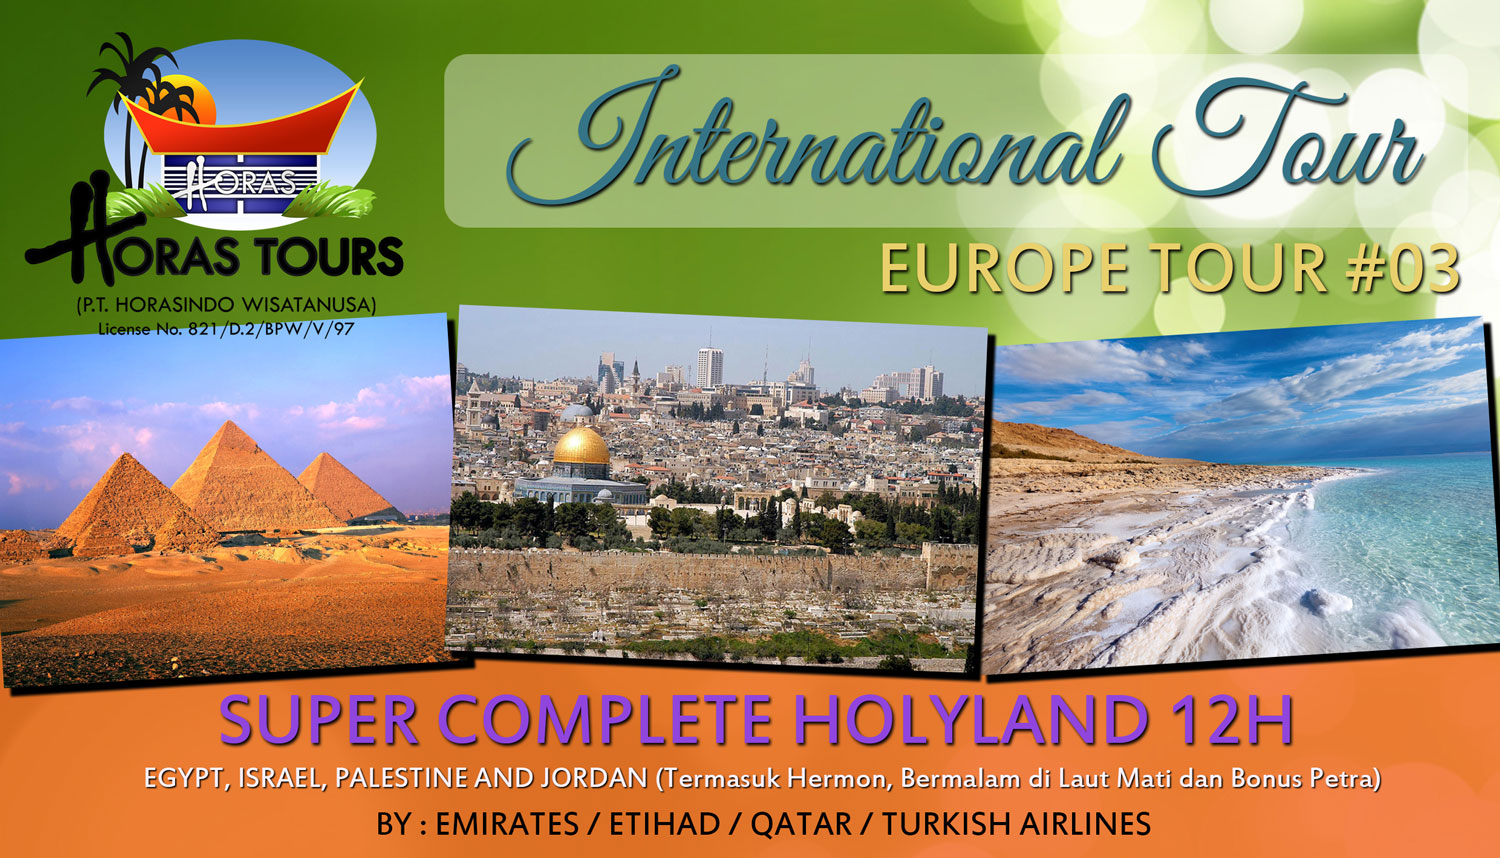 Complete Holyland Tour